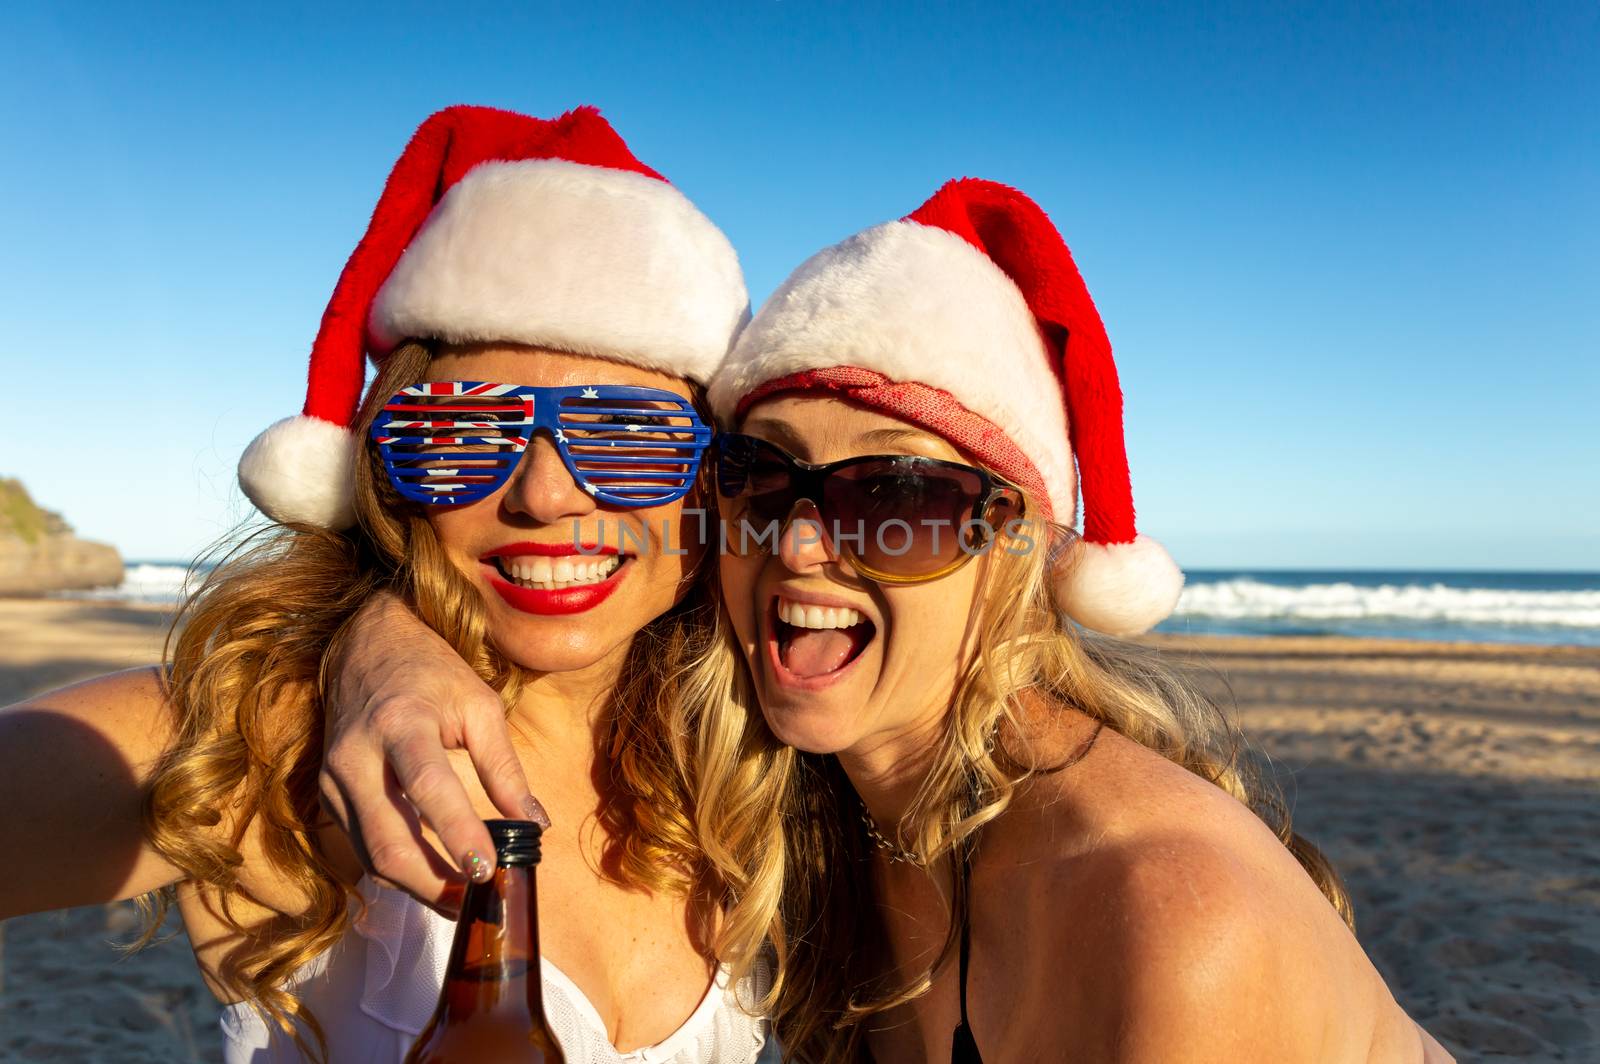 Australian adults reveling on the beach at Christmas time. Casual Christmas on beach in summer with food, beer, wine, etc.